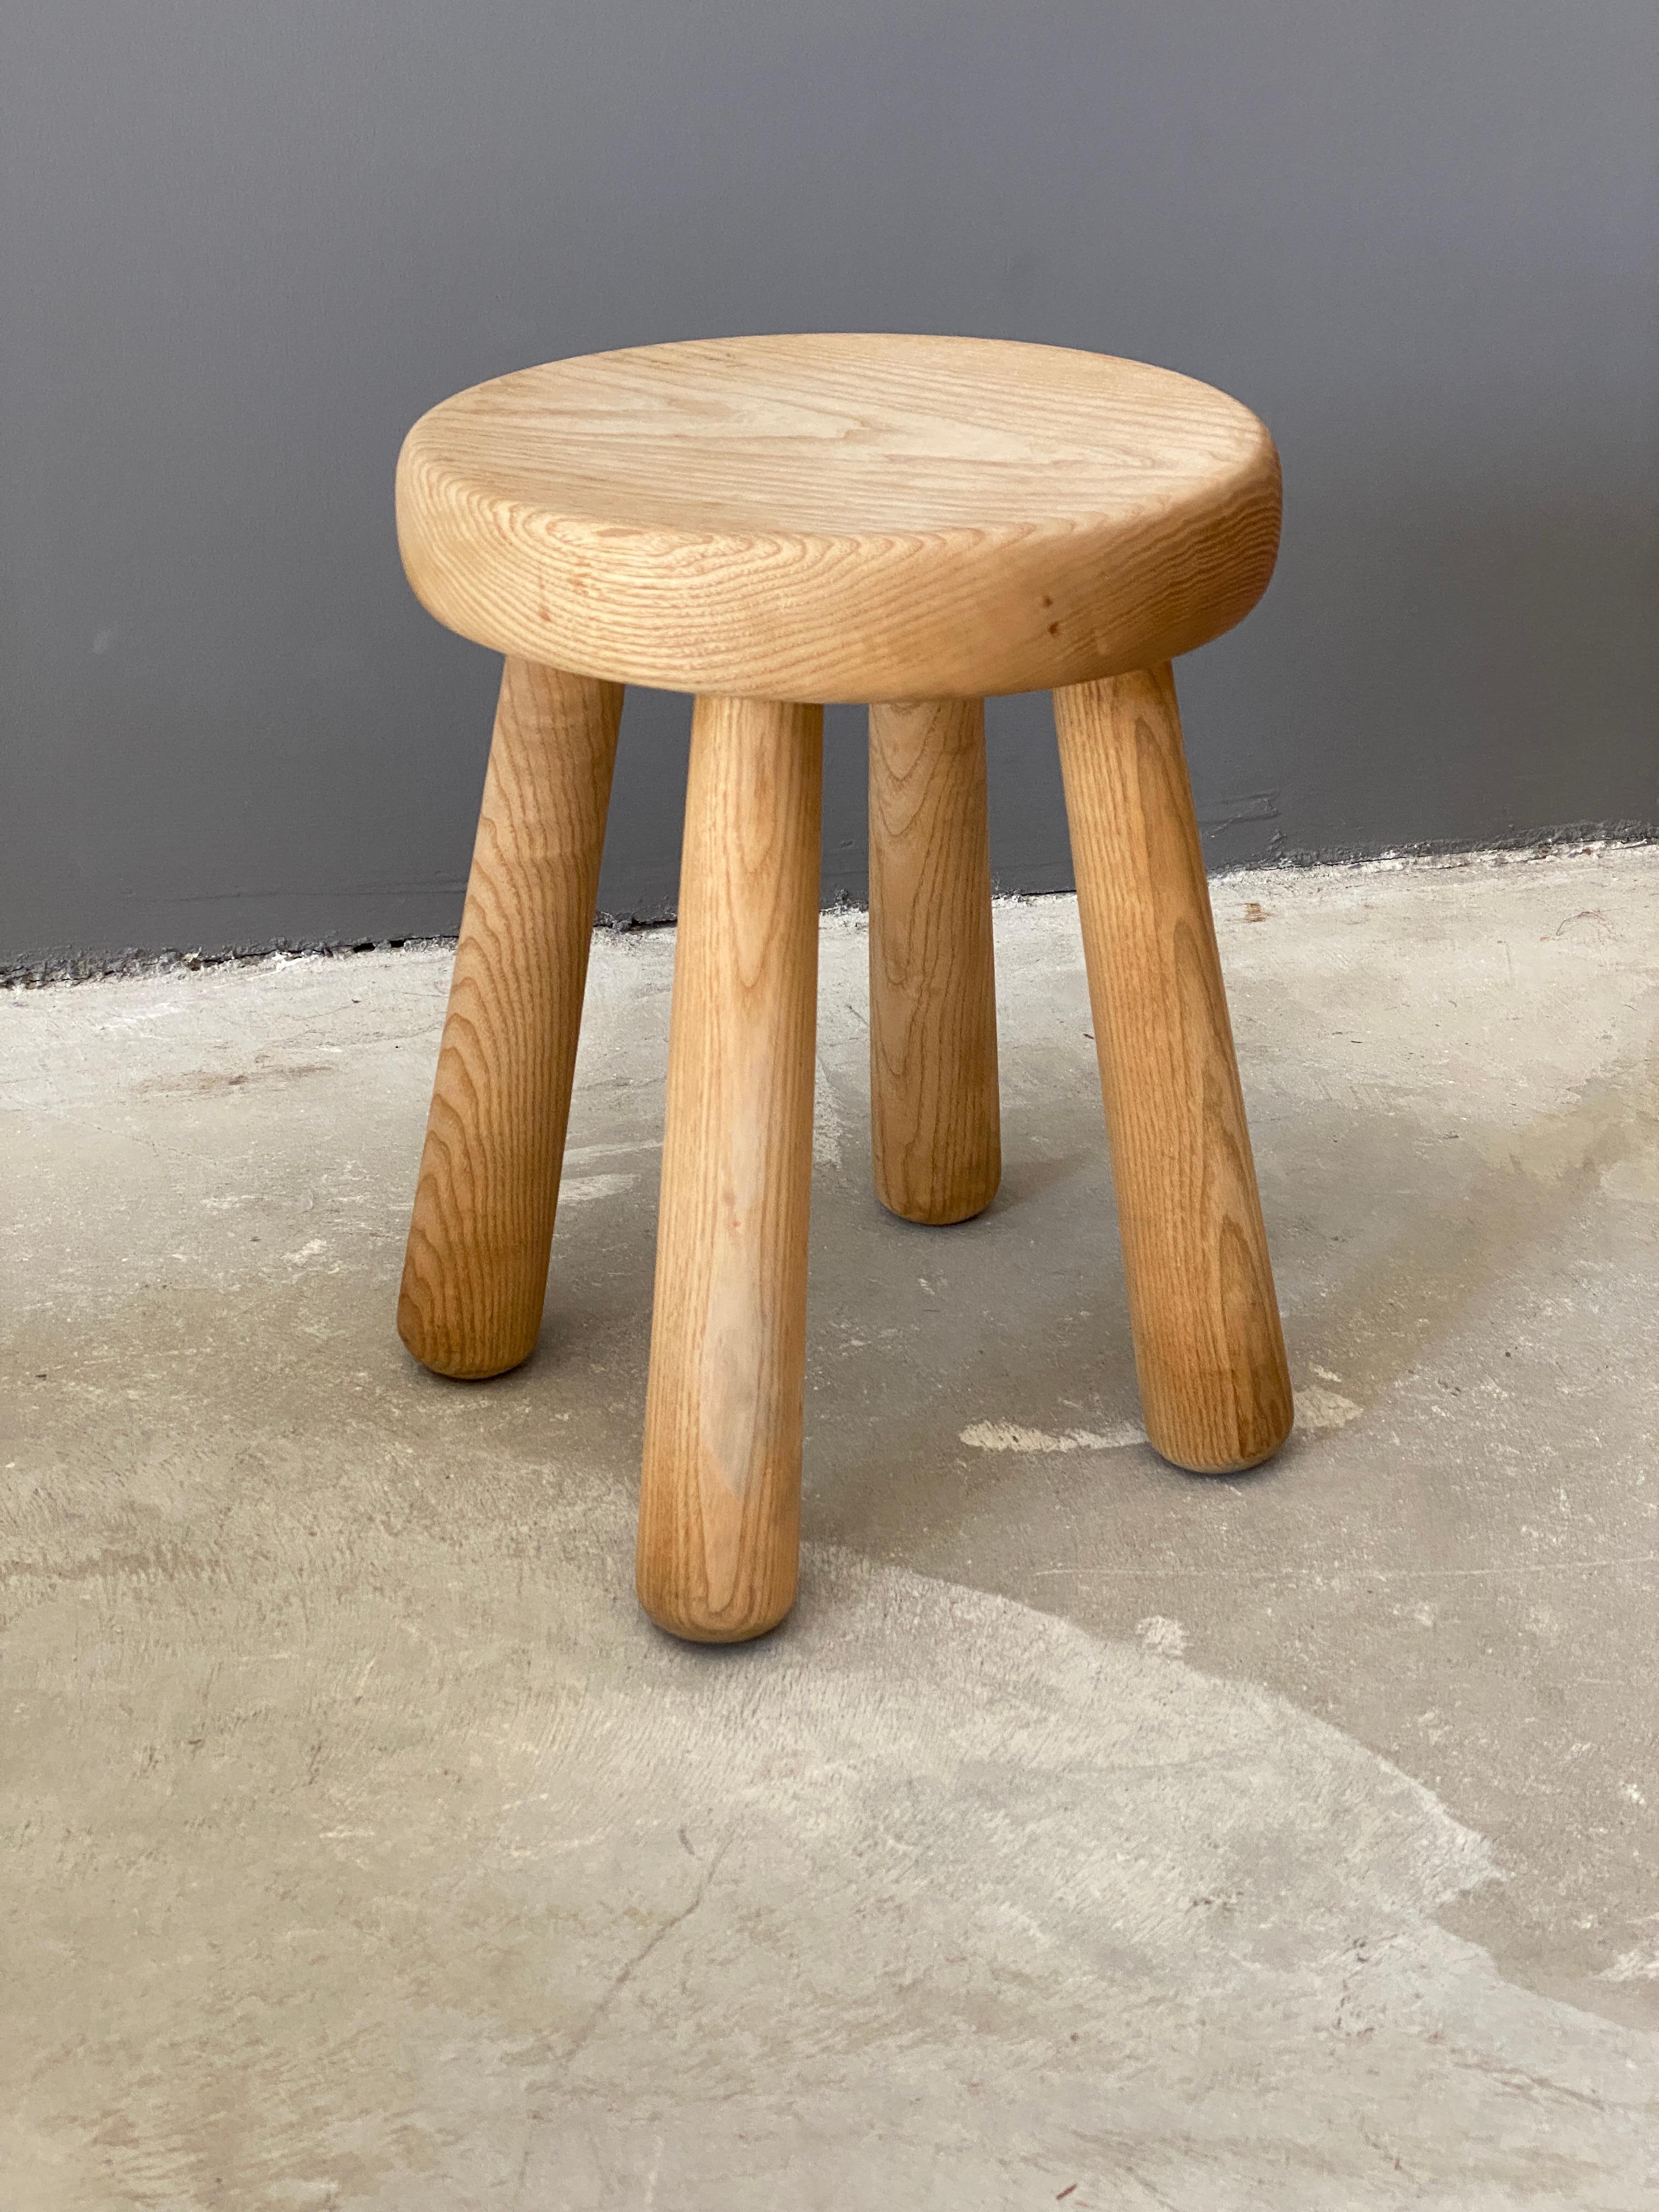 A sculptural stool, attributed to Ingvar Hildingsson, Kalmar Läns Slöjdare IH Slöjd Rugstorp. In lightly treated solid oak. 

Other designers of the period include Charlotte Perriand, Pierre Chapo, and Axel Einar Hjorth.